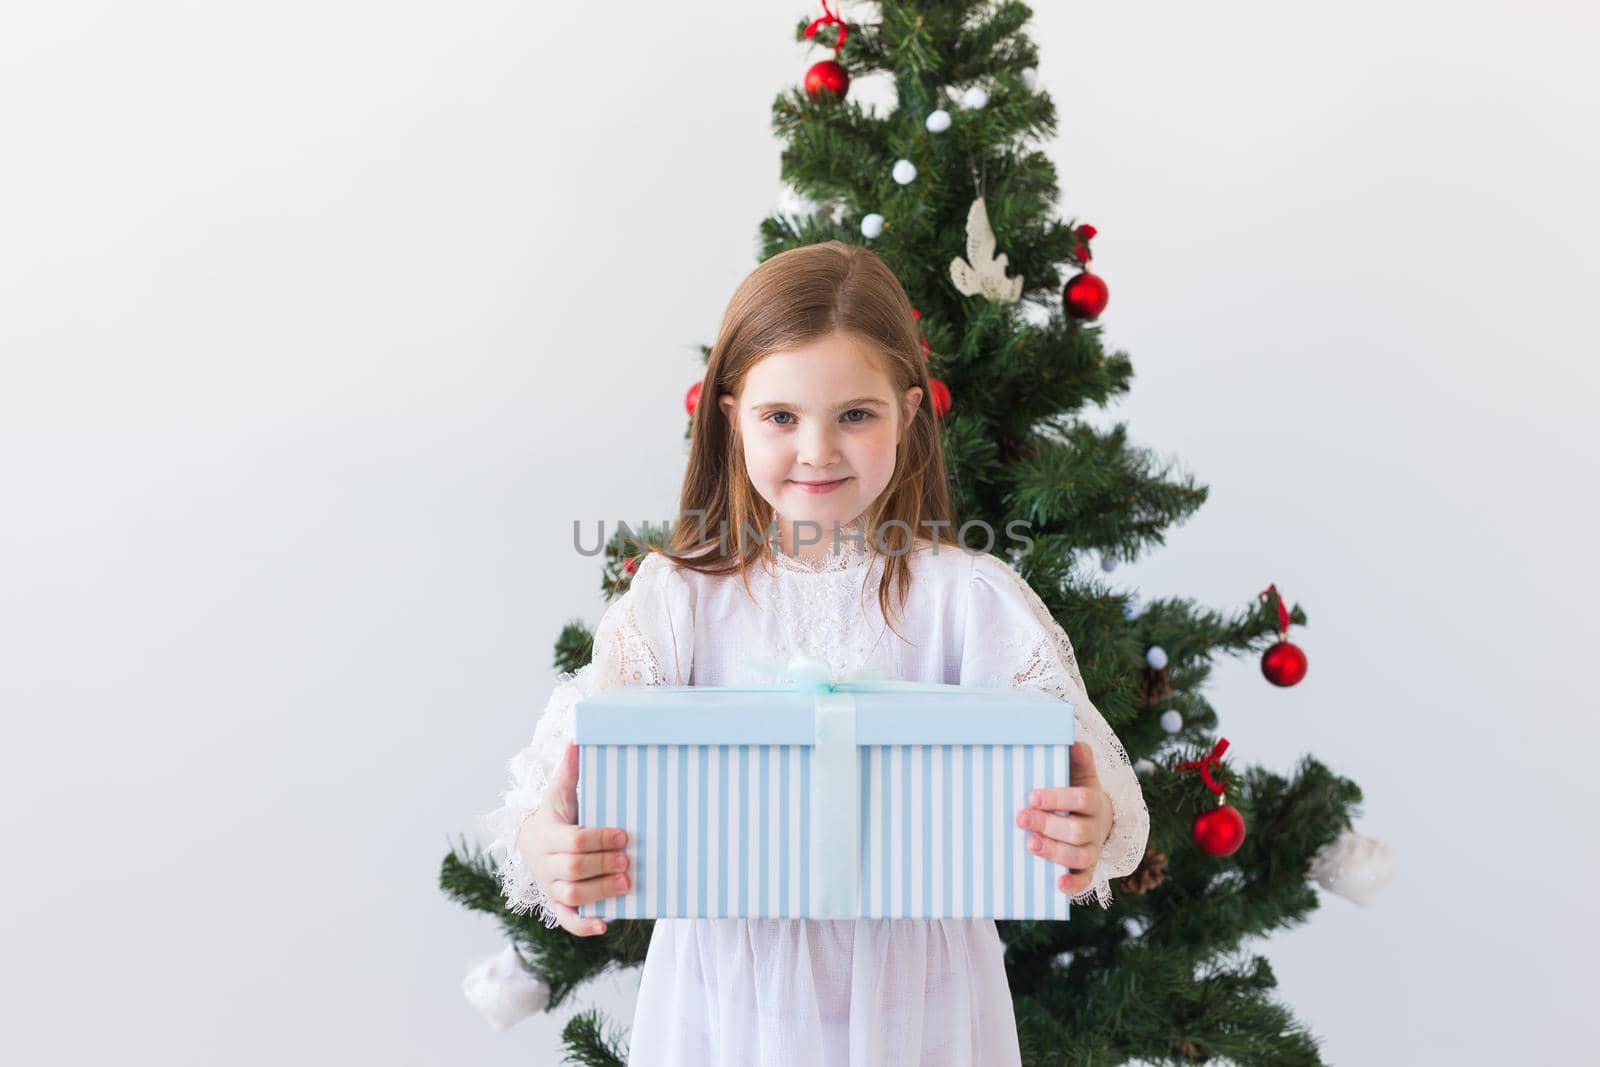 Child girl with gift box near Christmas tree. Holidays, christmas time and presents concept. by Satura86